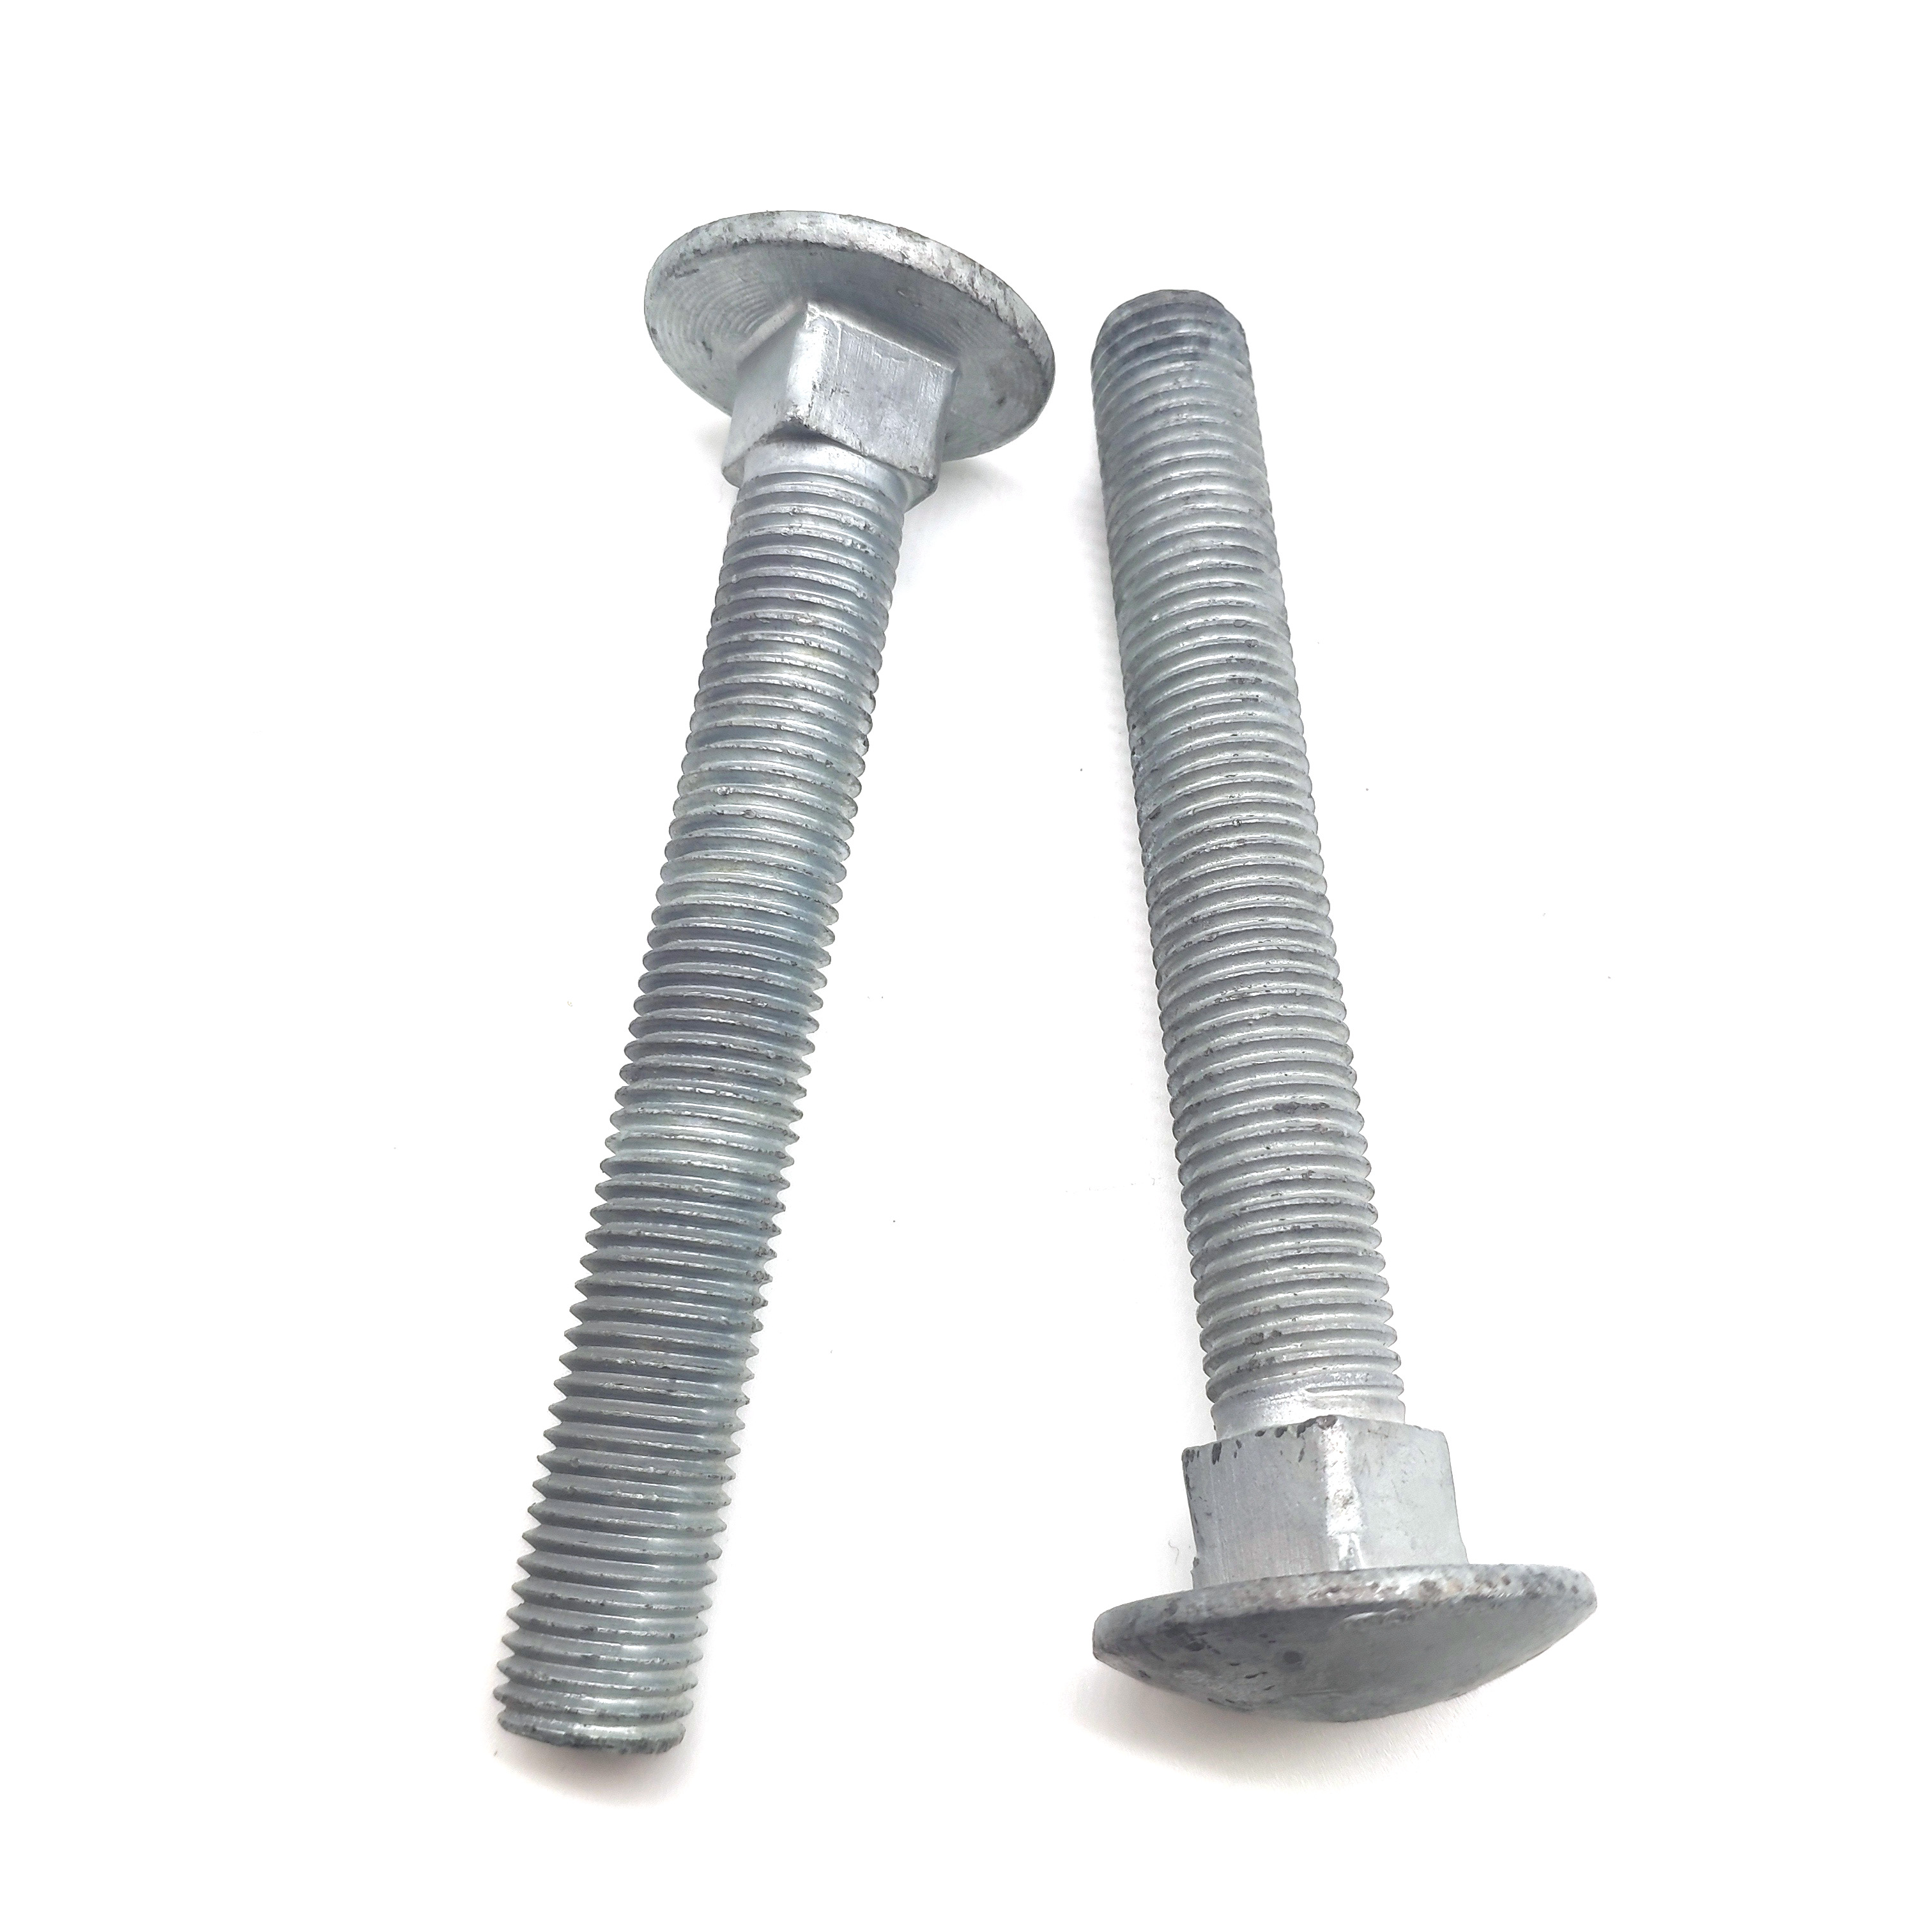 Carbon Steel Grade 4.8 5.8 6.8 M16 M20 HDG Carriage Bolt with Fine Pitch Thread for Power